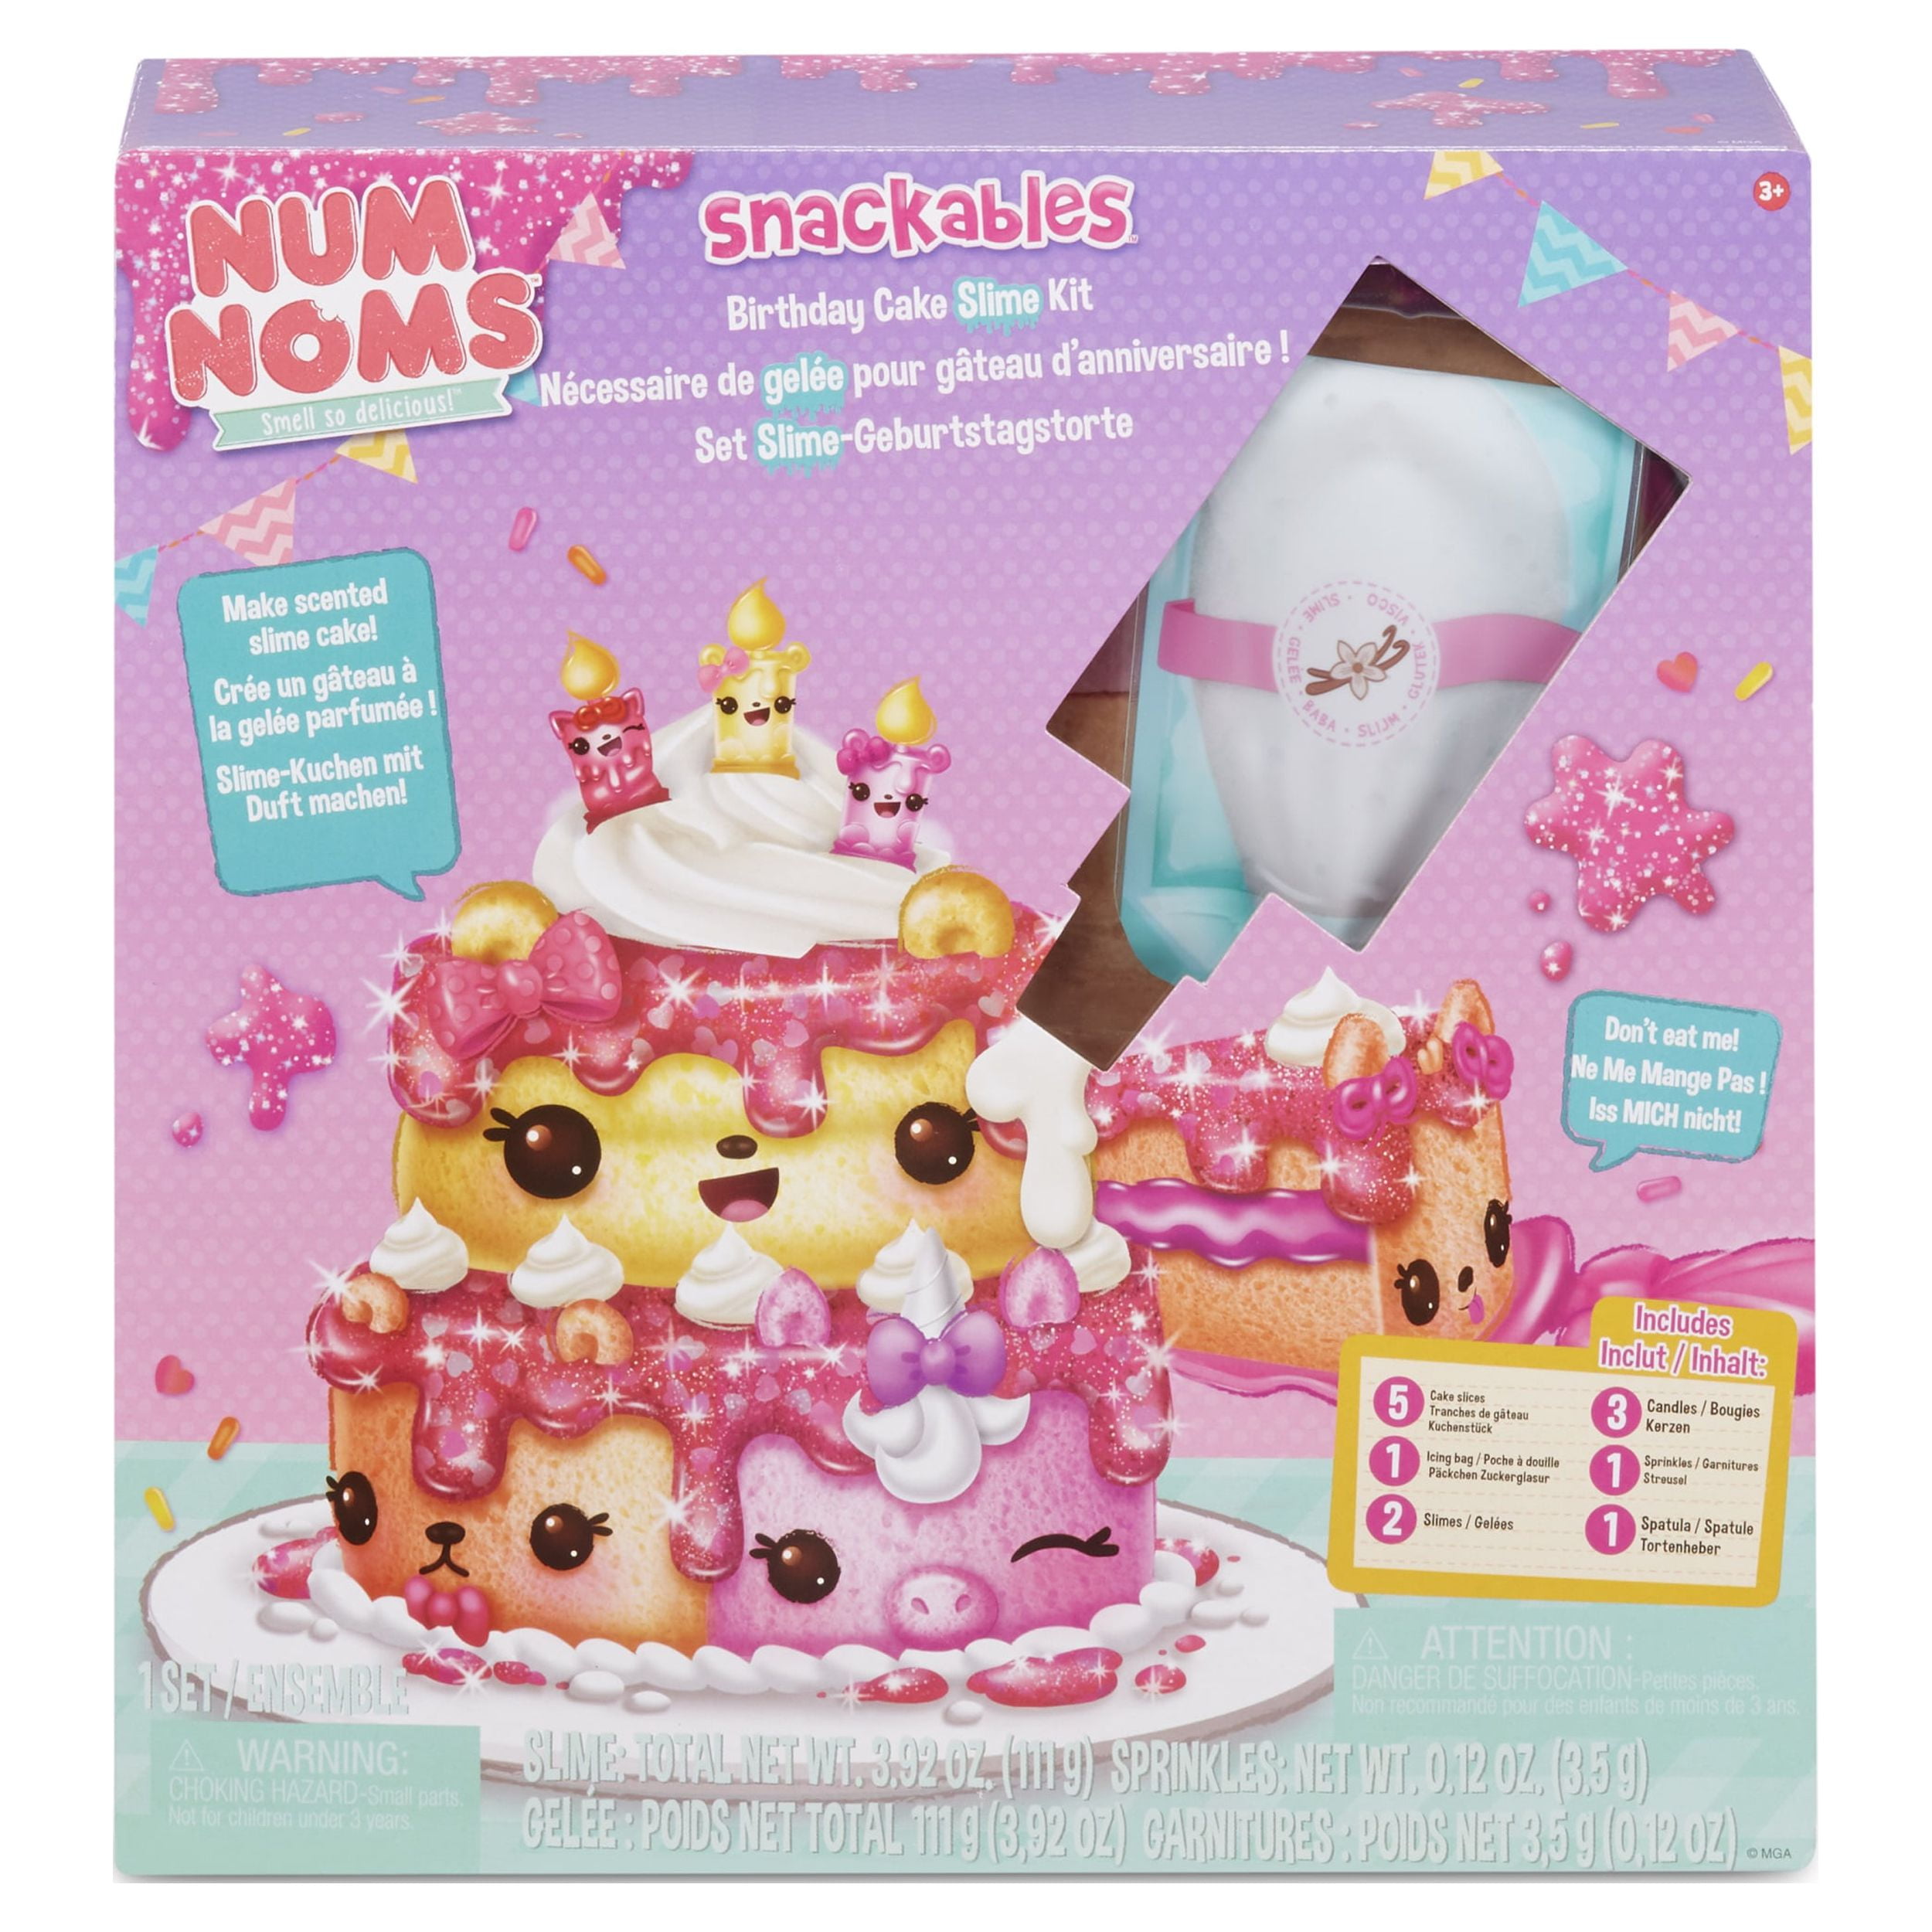 Num Noms Snackables Birthday Cake Slime Kit with Slime and Toppings